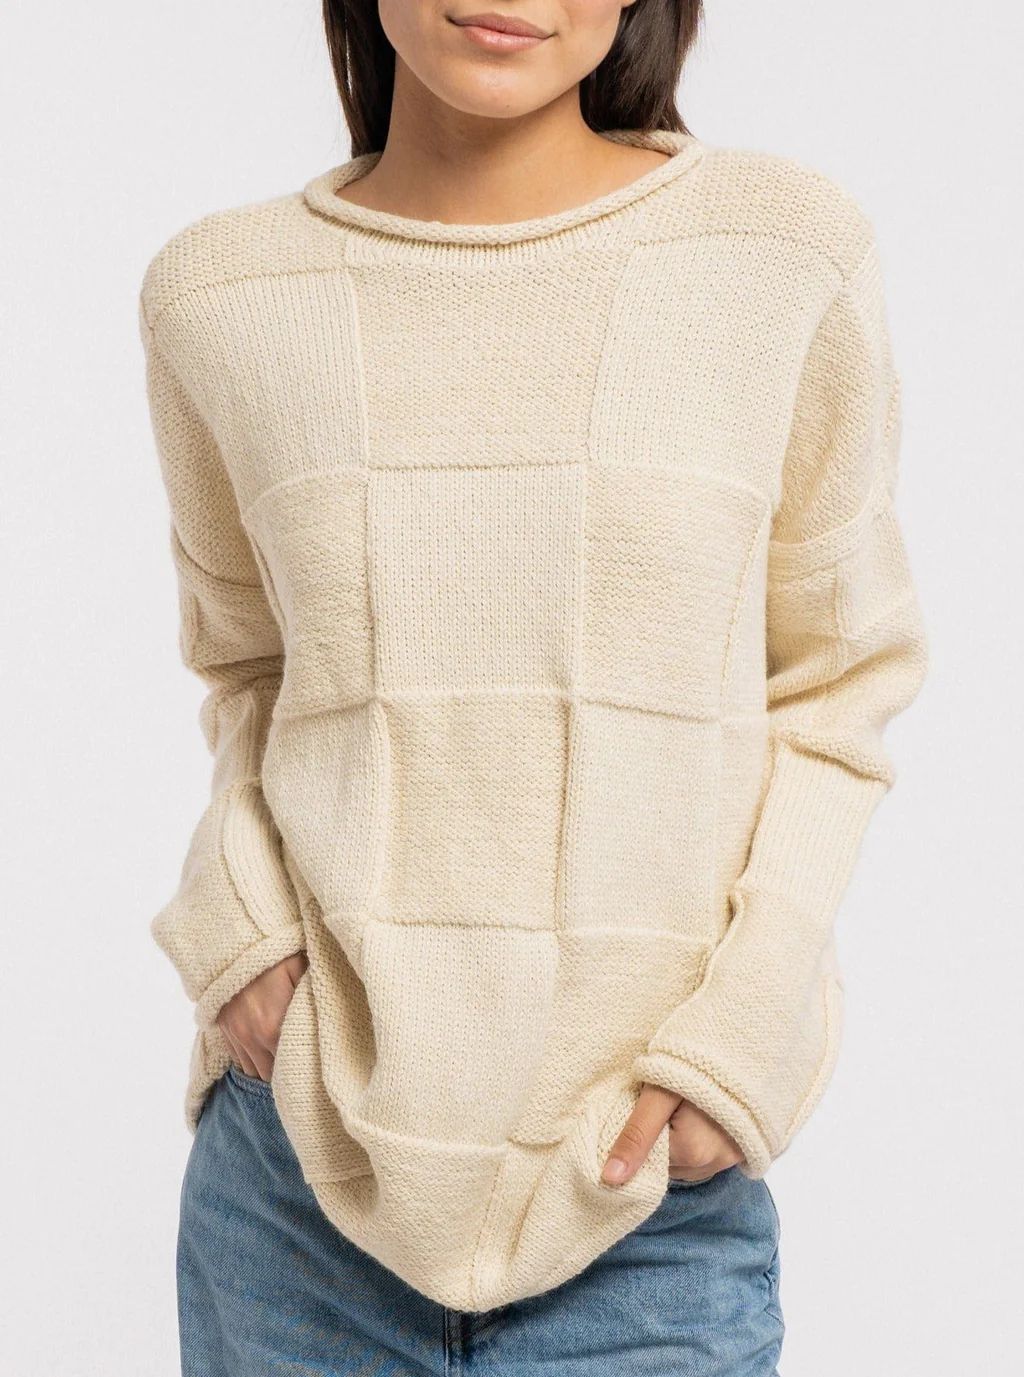 Heritage Basketweave Sweater - Ivory | LAUDE the Label